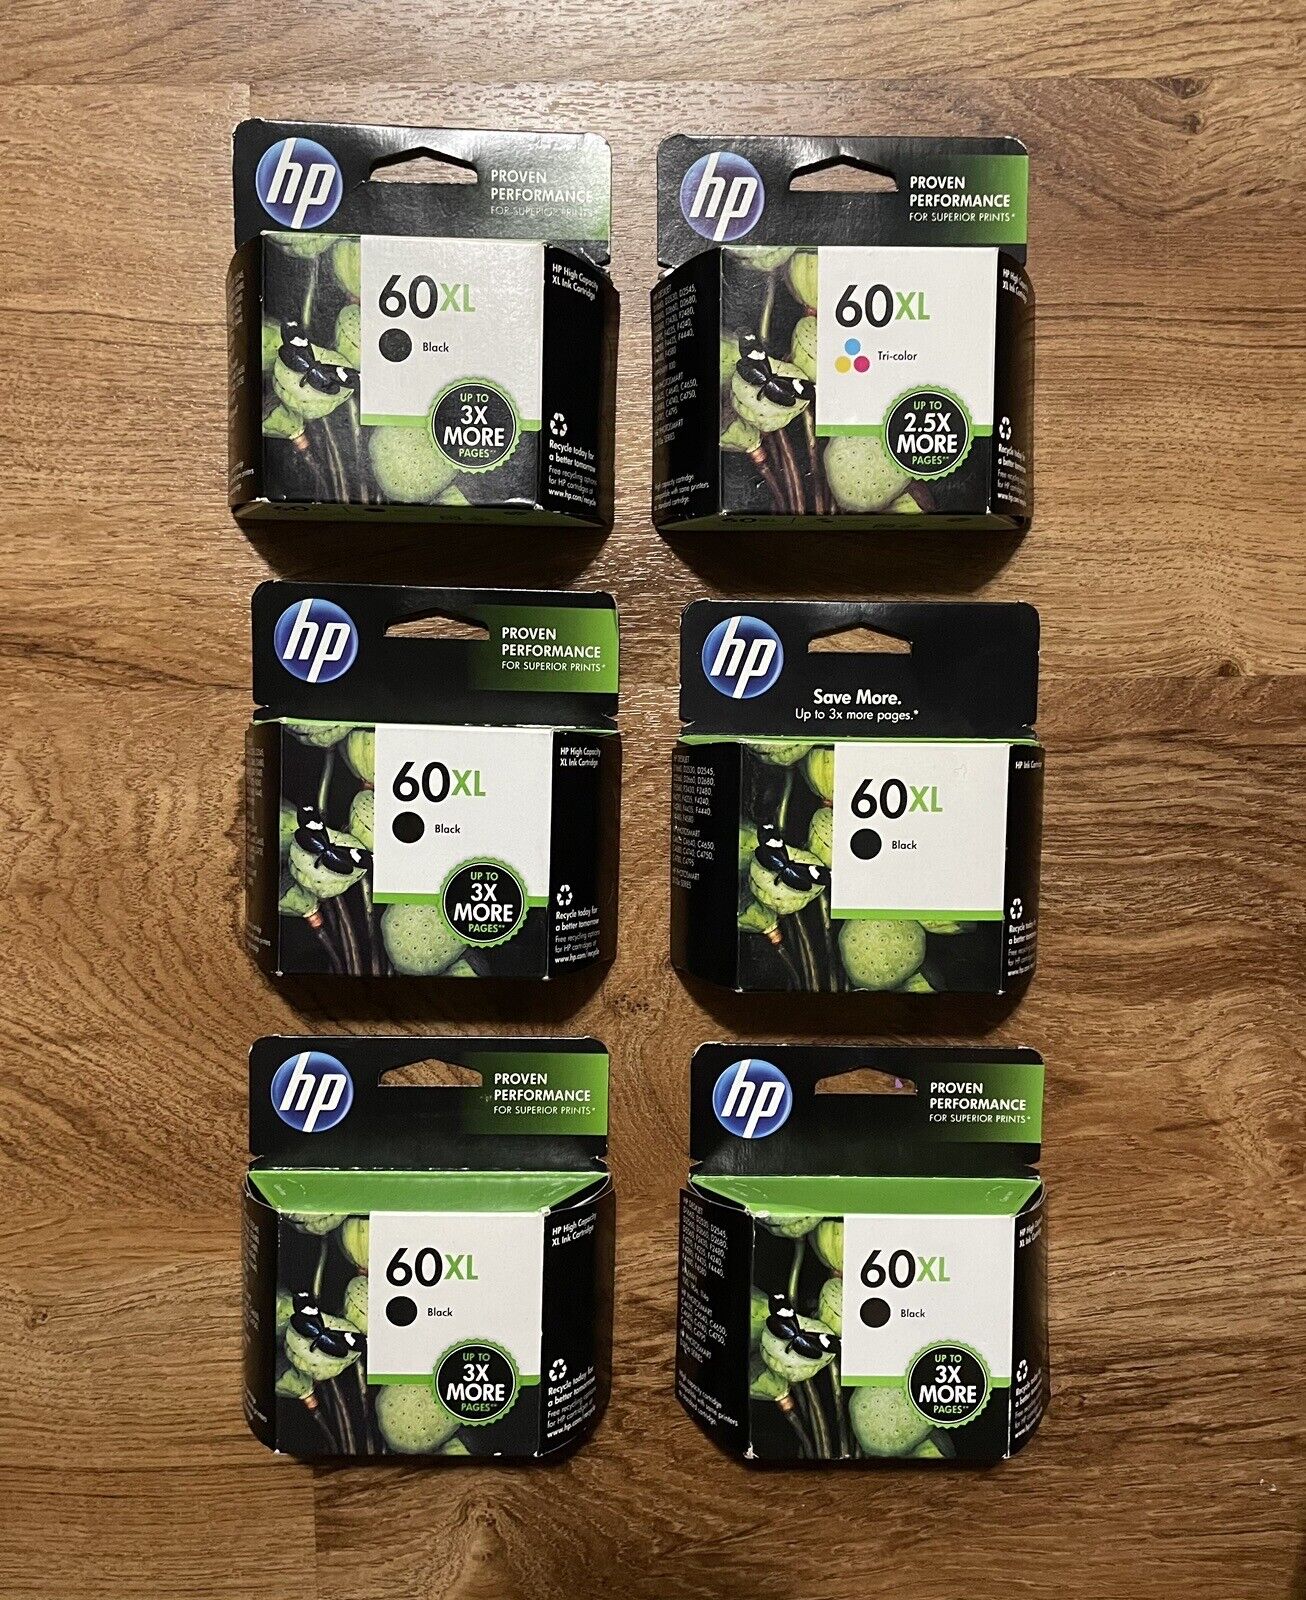 Lot Of 5 HP 60XL Original Black Ink Cartridges And 1 Tri Color All expired 2013